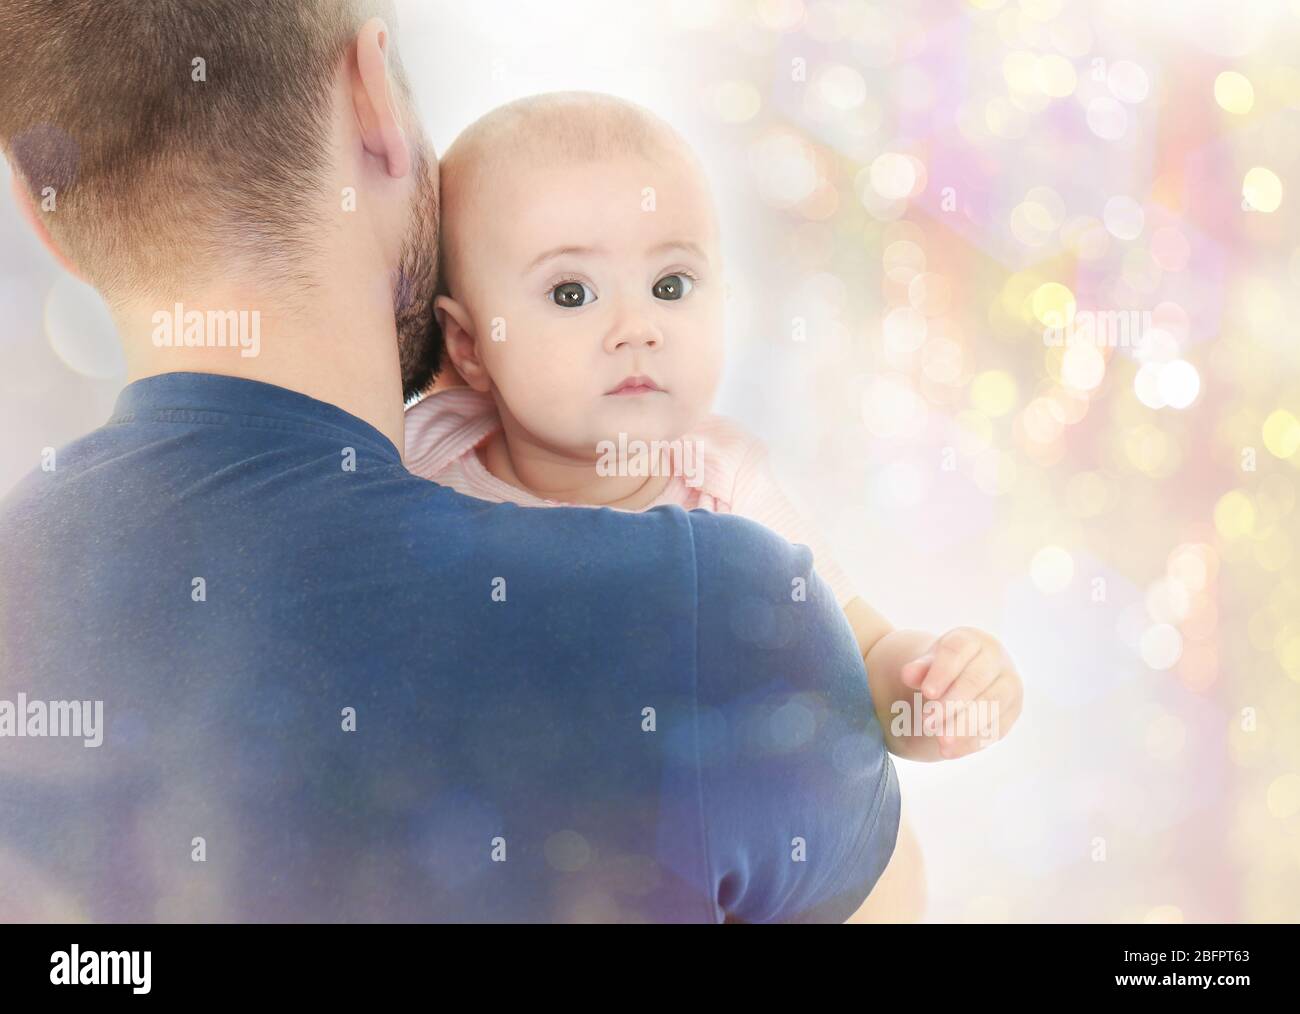 Father with baby on Christmas lights background Stock Photo